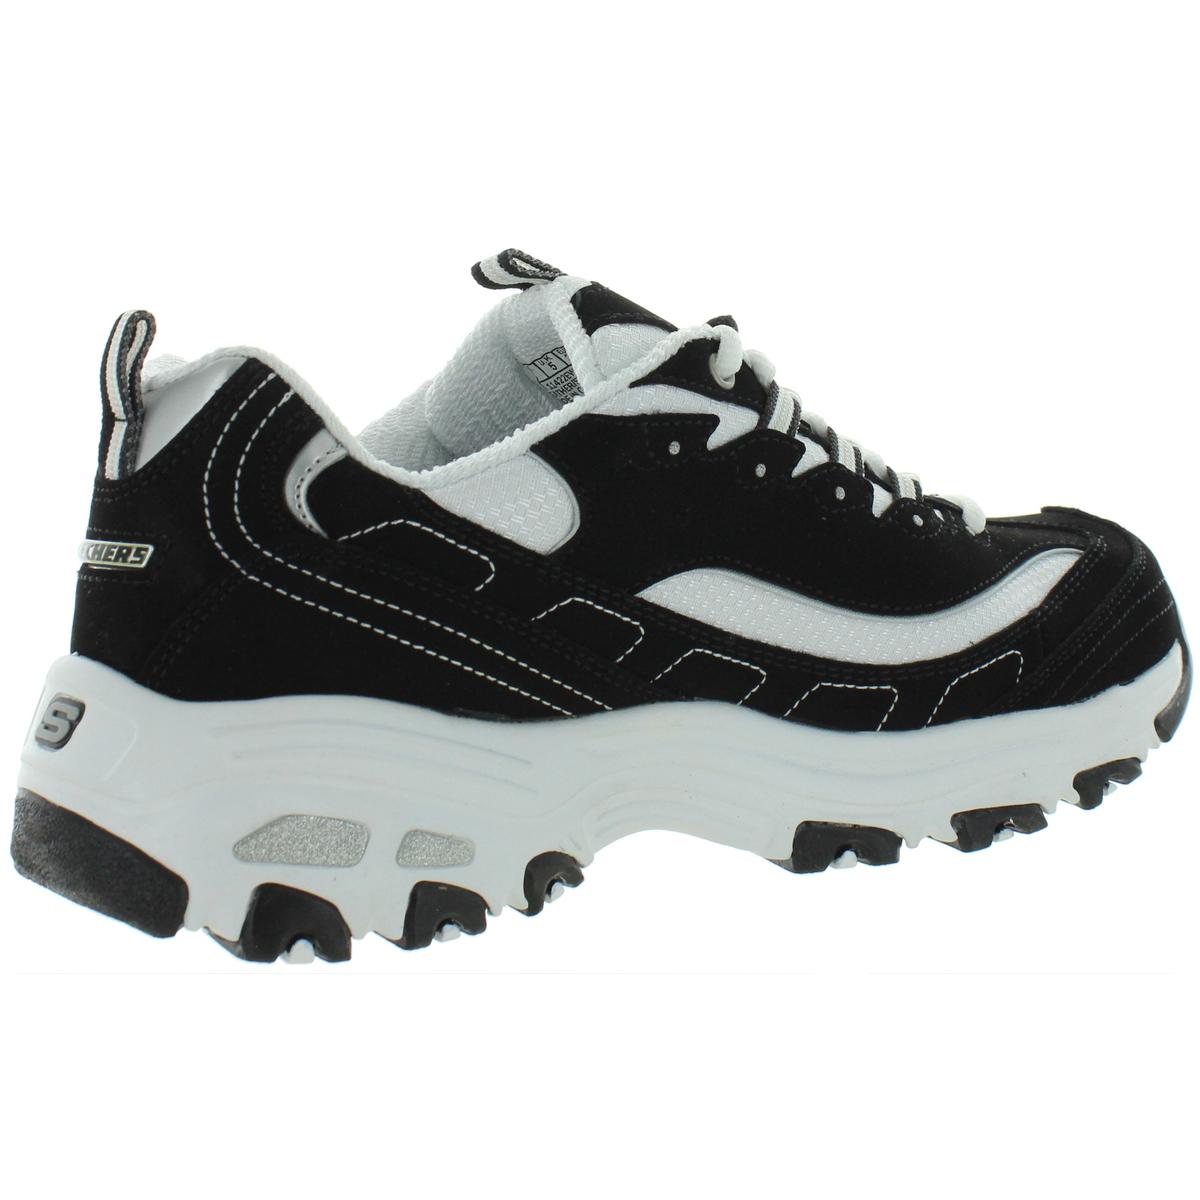 Skechers Womens Leather Wide Fit Arch Support Walking Shoes Athletic BHFO 2722 | eBay